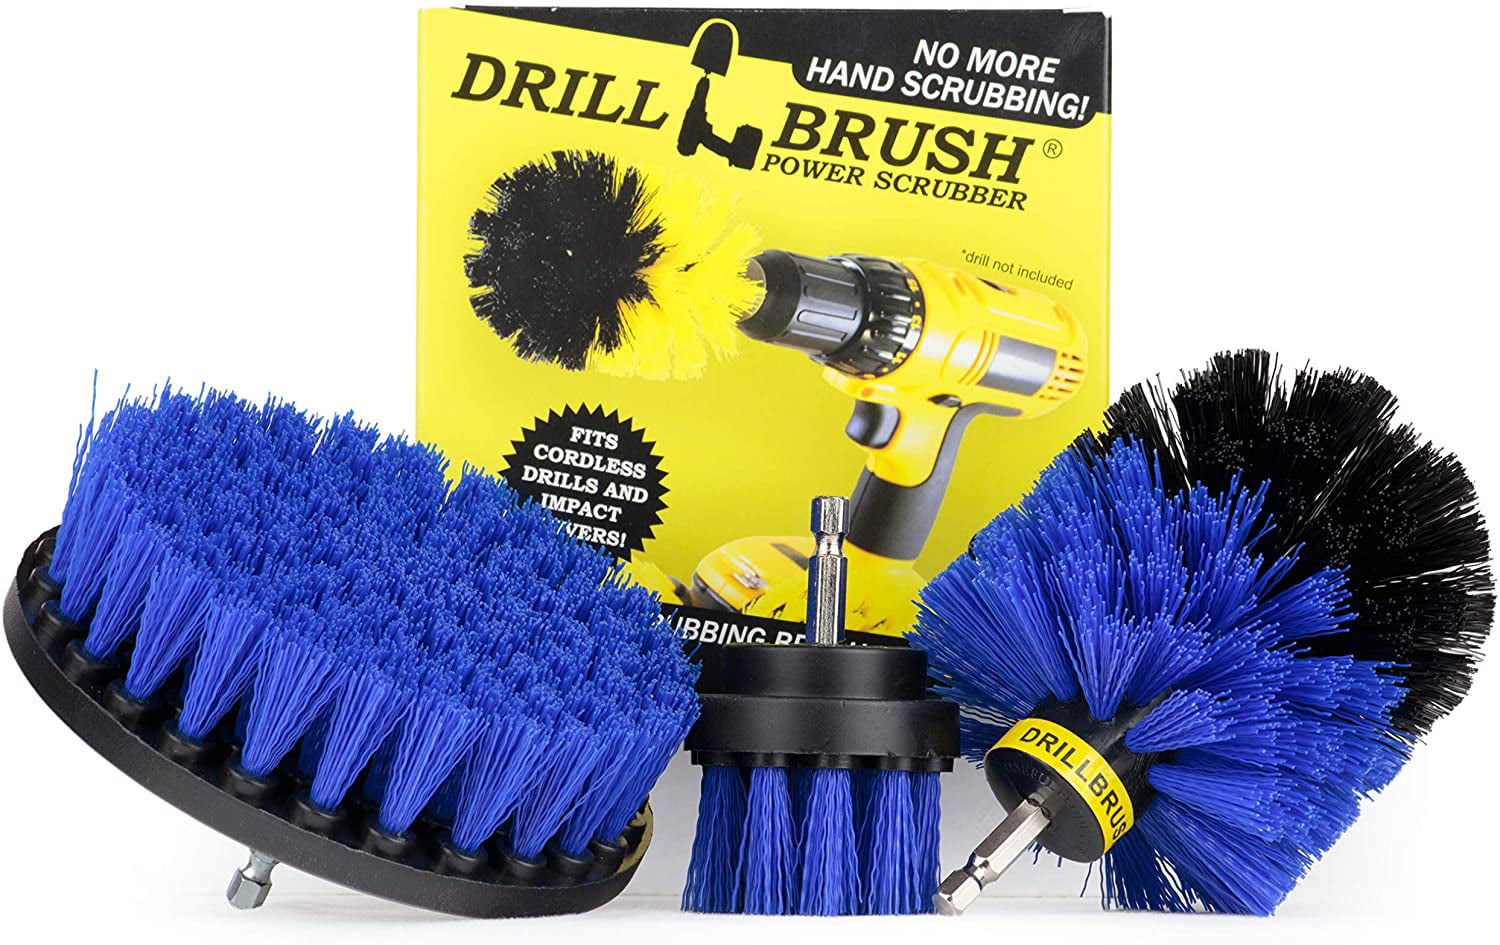 Hull Cleaner Cleaning Supplies Drill Brush Oxidation Barnacles Boat Inflatable Canoe Pond Scum Deck Raft Spin Brush Marine Residue Boat Accessories Kayak